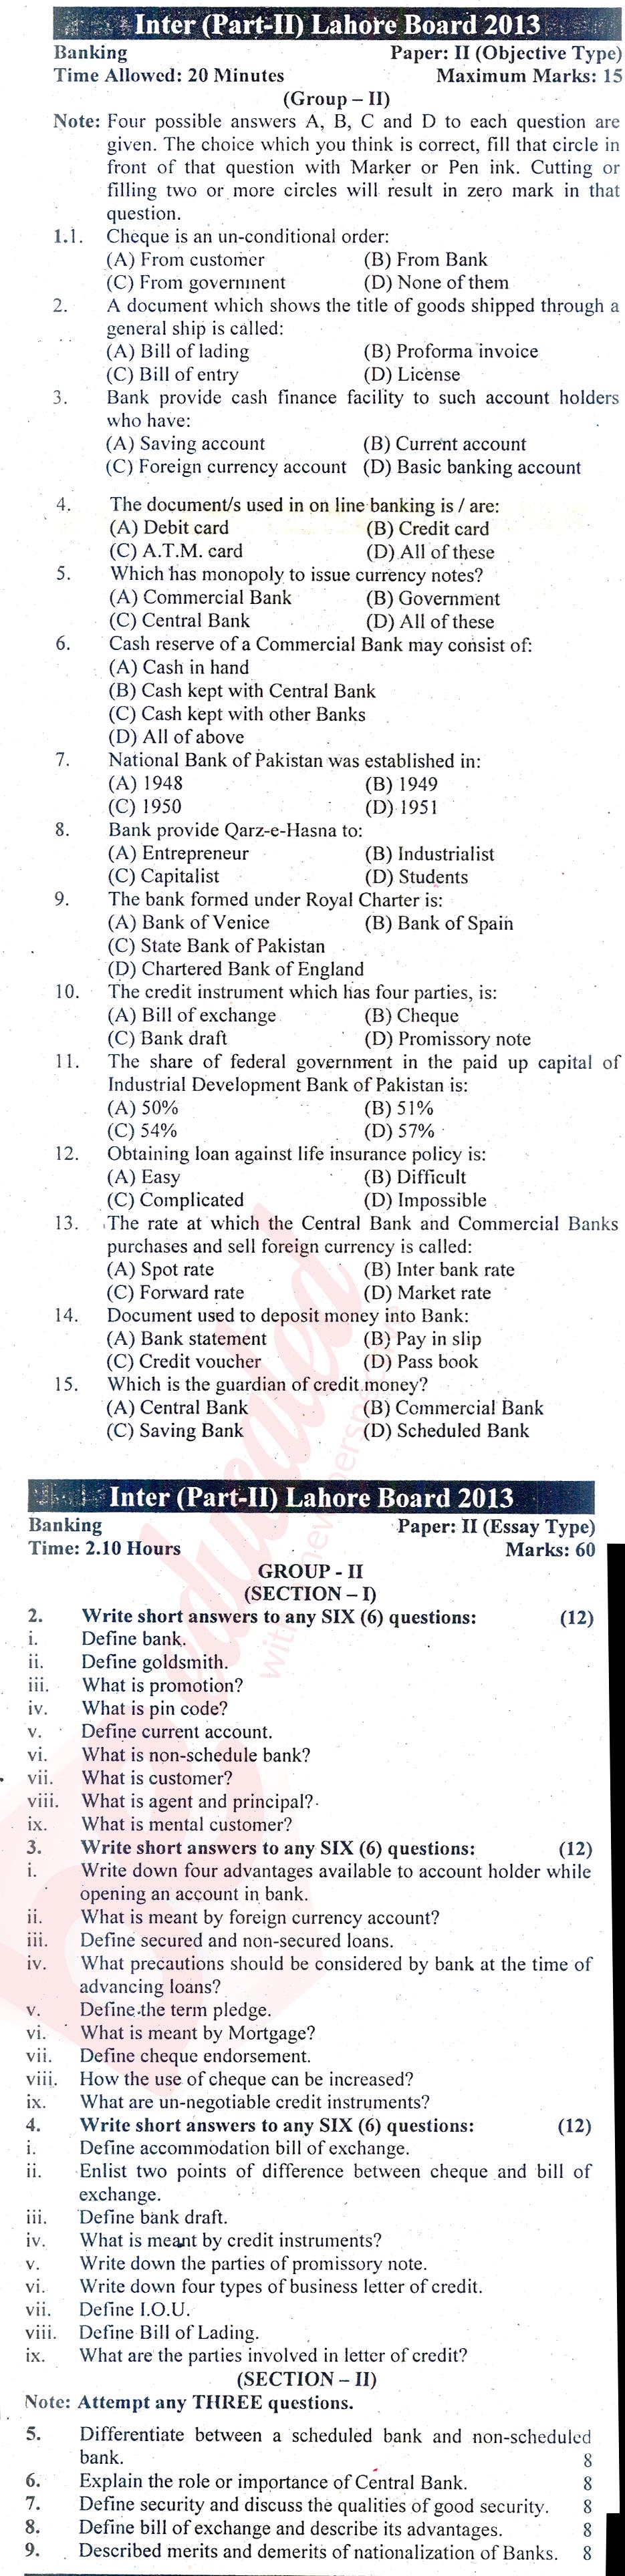 Principles of Banking ICOM Part 2 Past Paper Group 2 BISE Lahore 2013